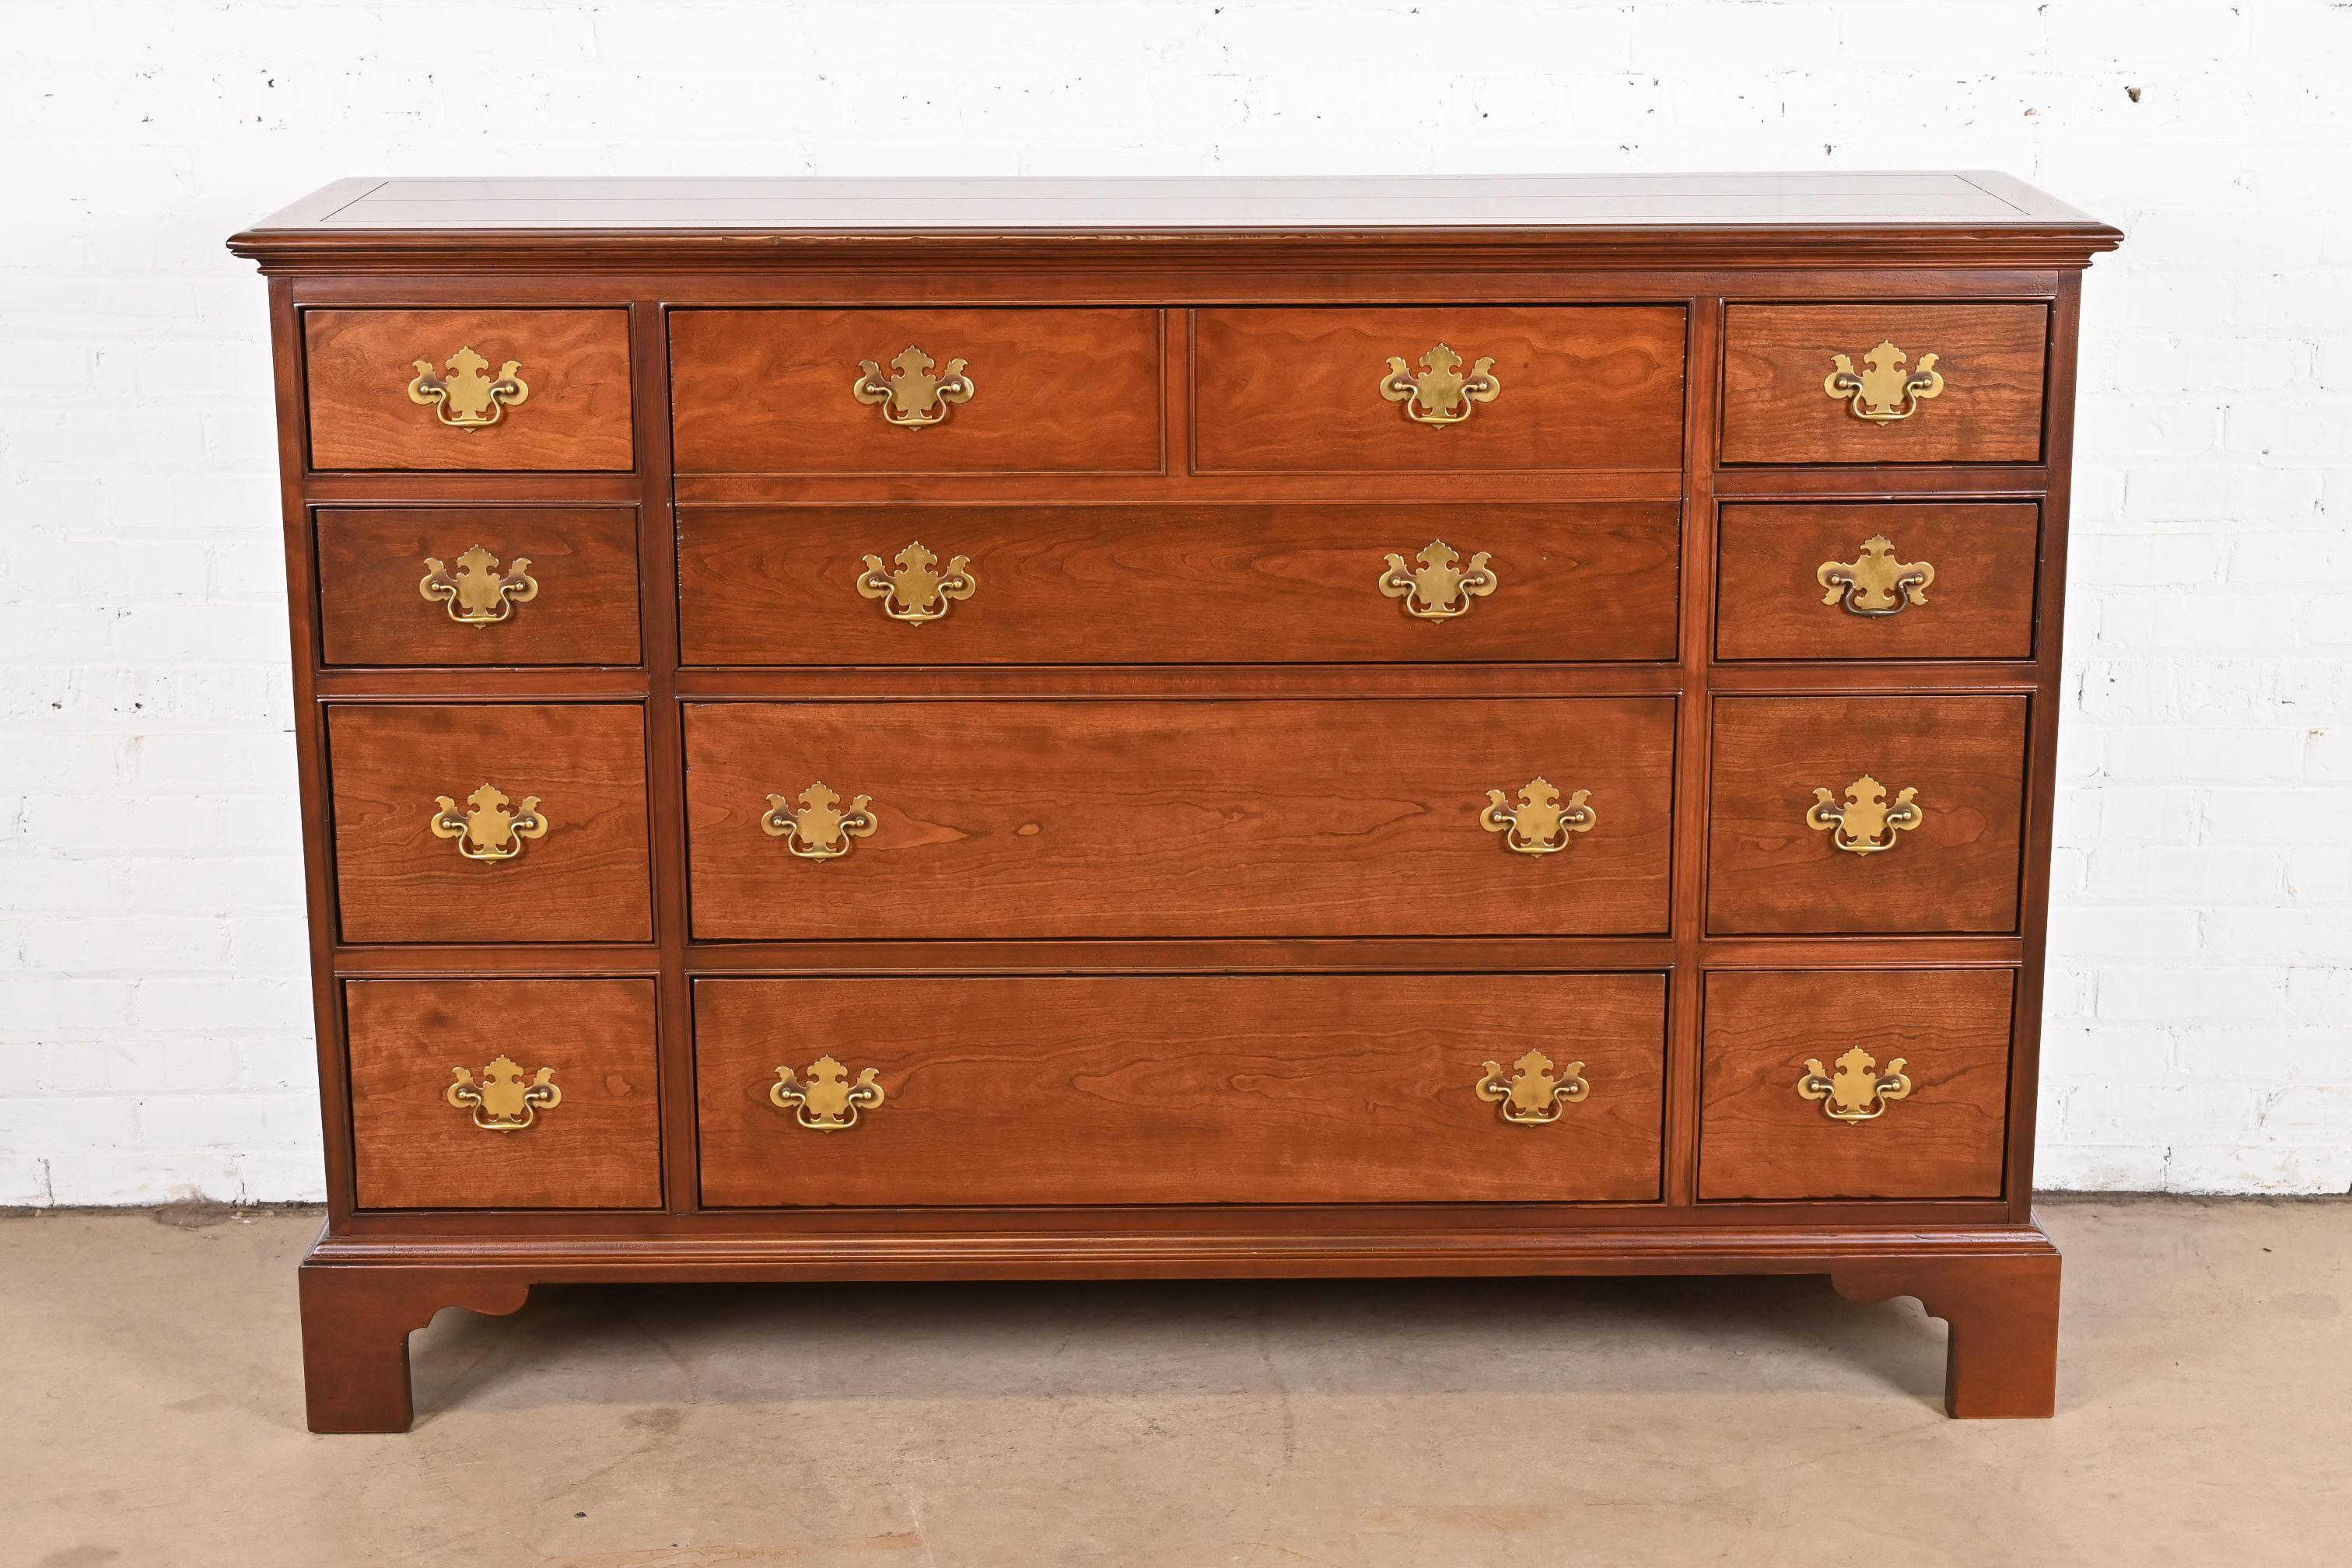 20th Century Baker Furniture Georgian Cherry Chest of Drawers with Secretary Desk, Refinished